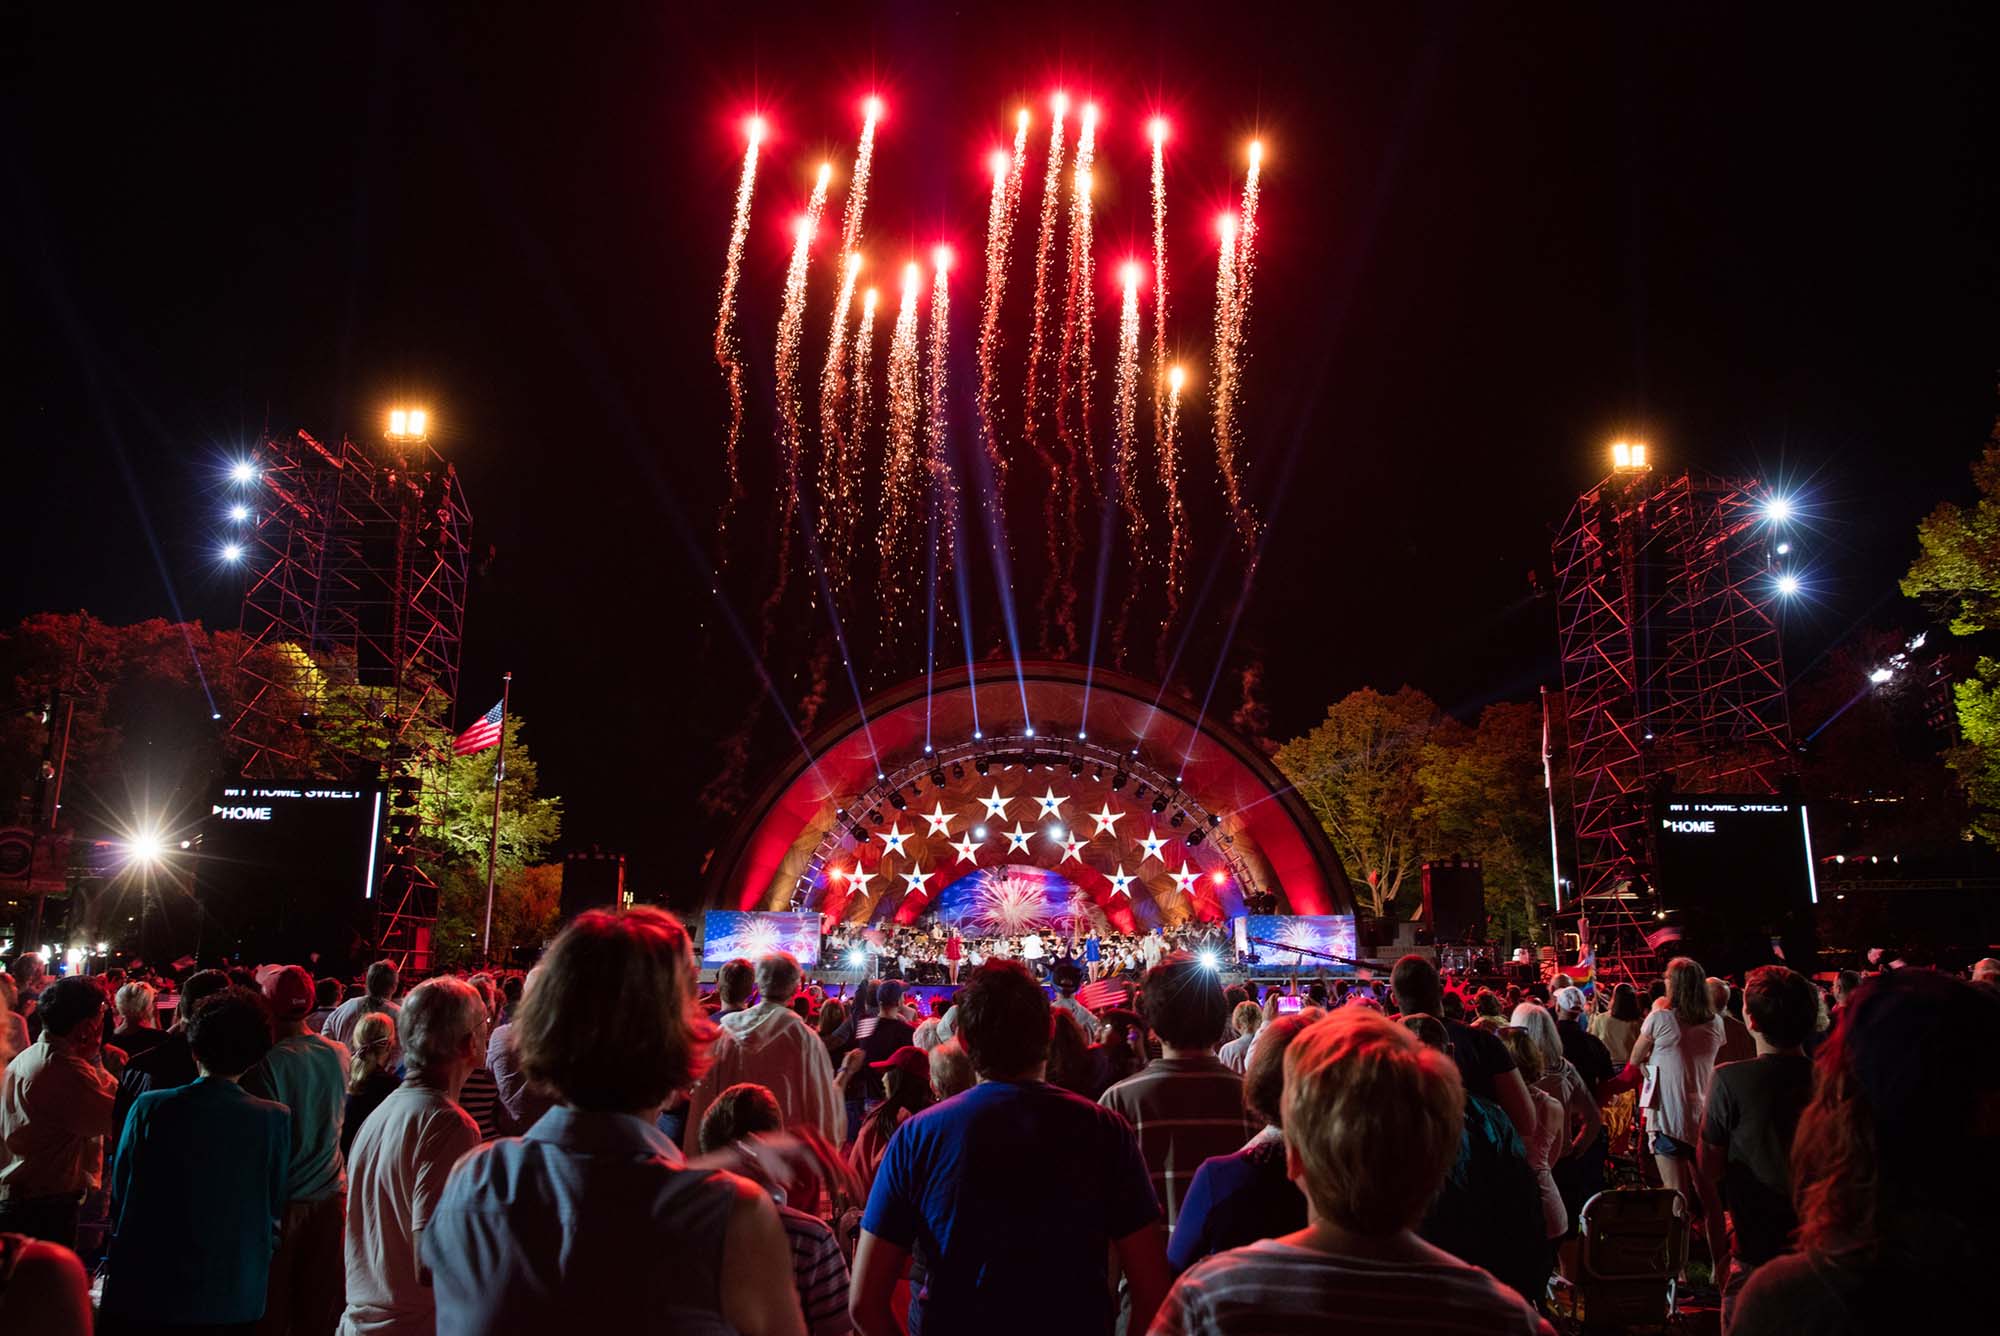 Photo of The Boston Pops performing their annual Fourth of July Fireworks Spectacular at the Hatch Memorial Shell on the Charles River Esplanade. In the photo, the Hatch Shell is lit in red white and blue. The backs of spectators' heads are seen as the look up towards about a dozen fireworks that shoot up from the shell into the black sky.